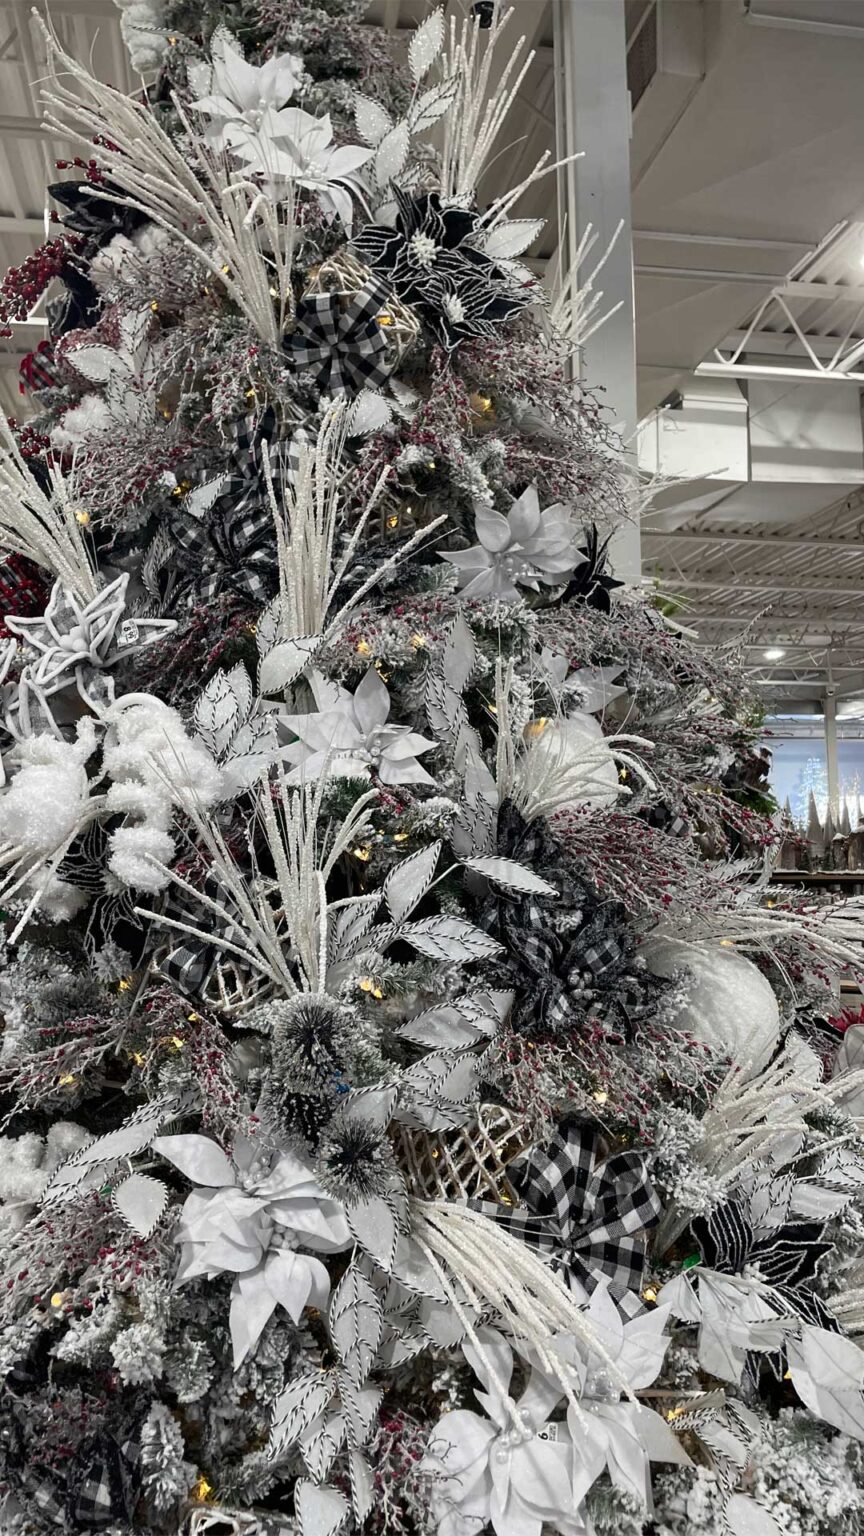 What are the trends for the 2022 Christmas decorations?